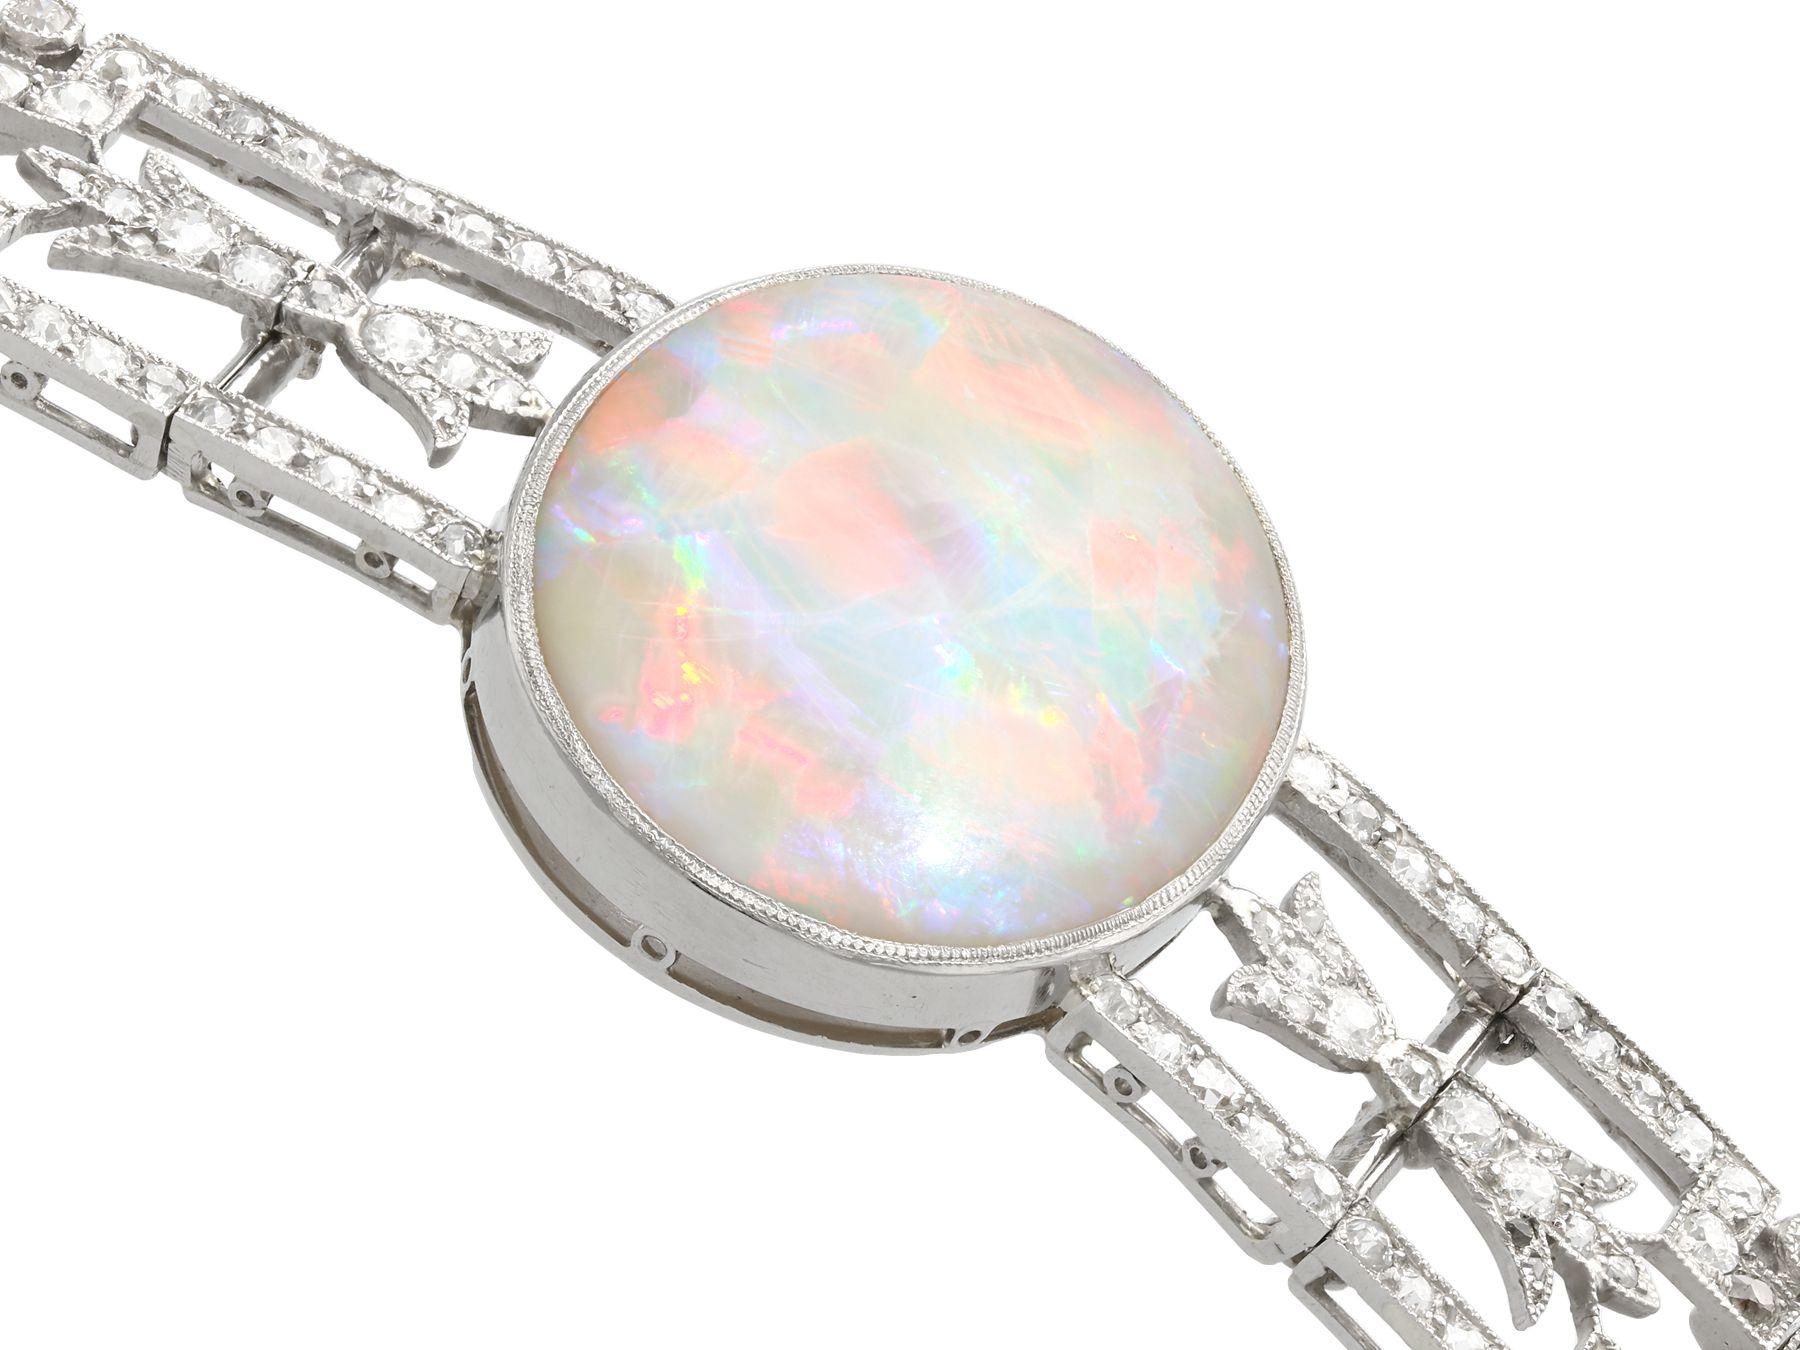 A stunning, fine and impressive antique 24.66 carat opal and 9.81 carat diamond, platinum bracelet; part of our diverse antique jewelry and estate jewelry collections.

This stunning, fine and impressive antique bracelet has been crafted in